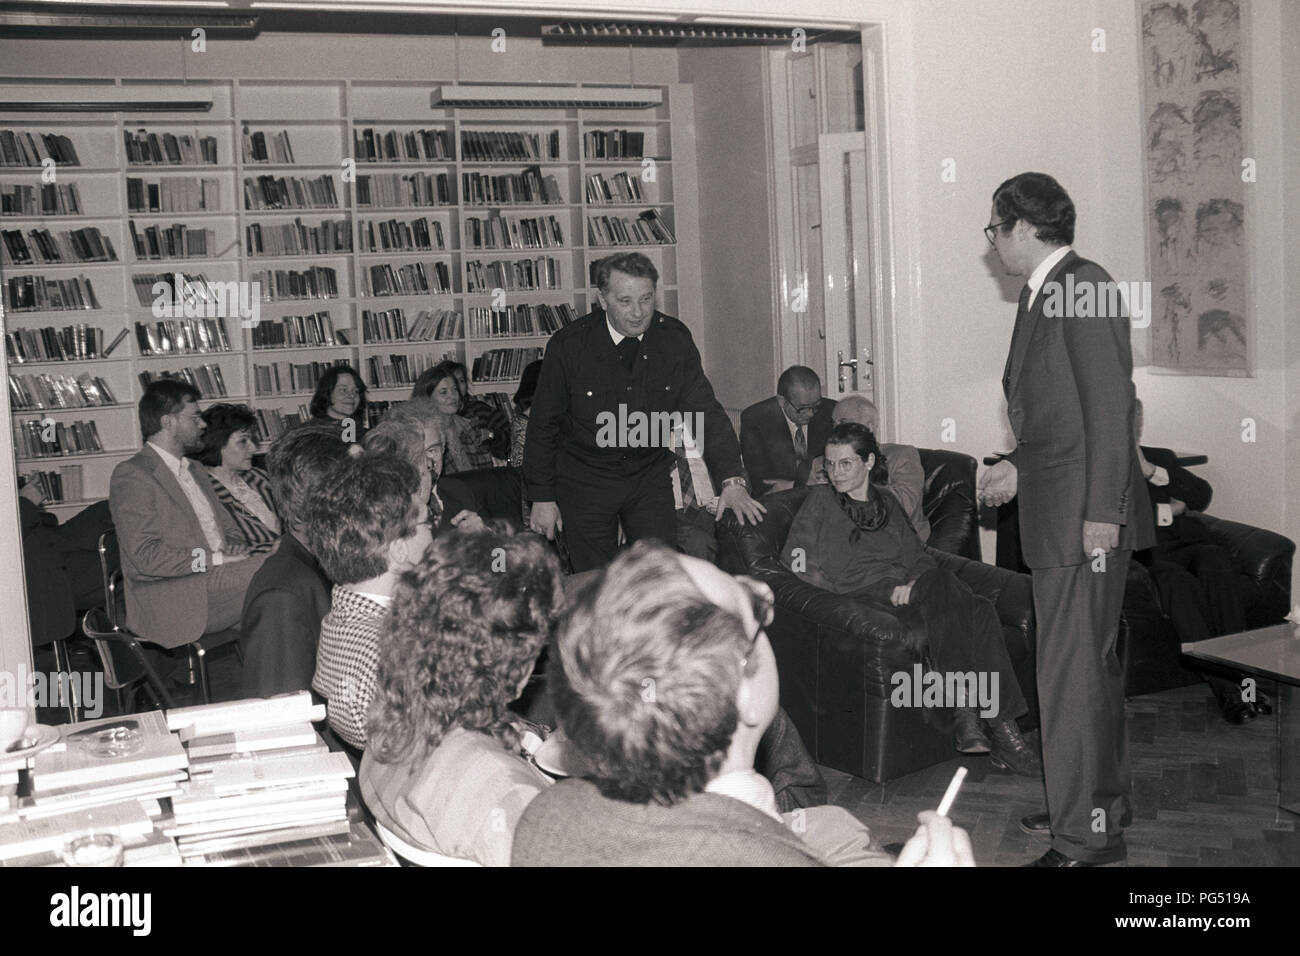 Meeting of the IWM (Institute for Human Sciences) in Vienna in 1990. In front stands the philosopher Krzysztof Michalski. Stock Photo